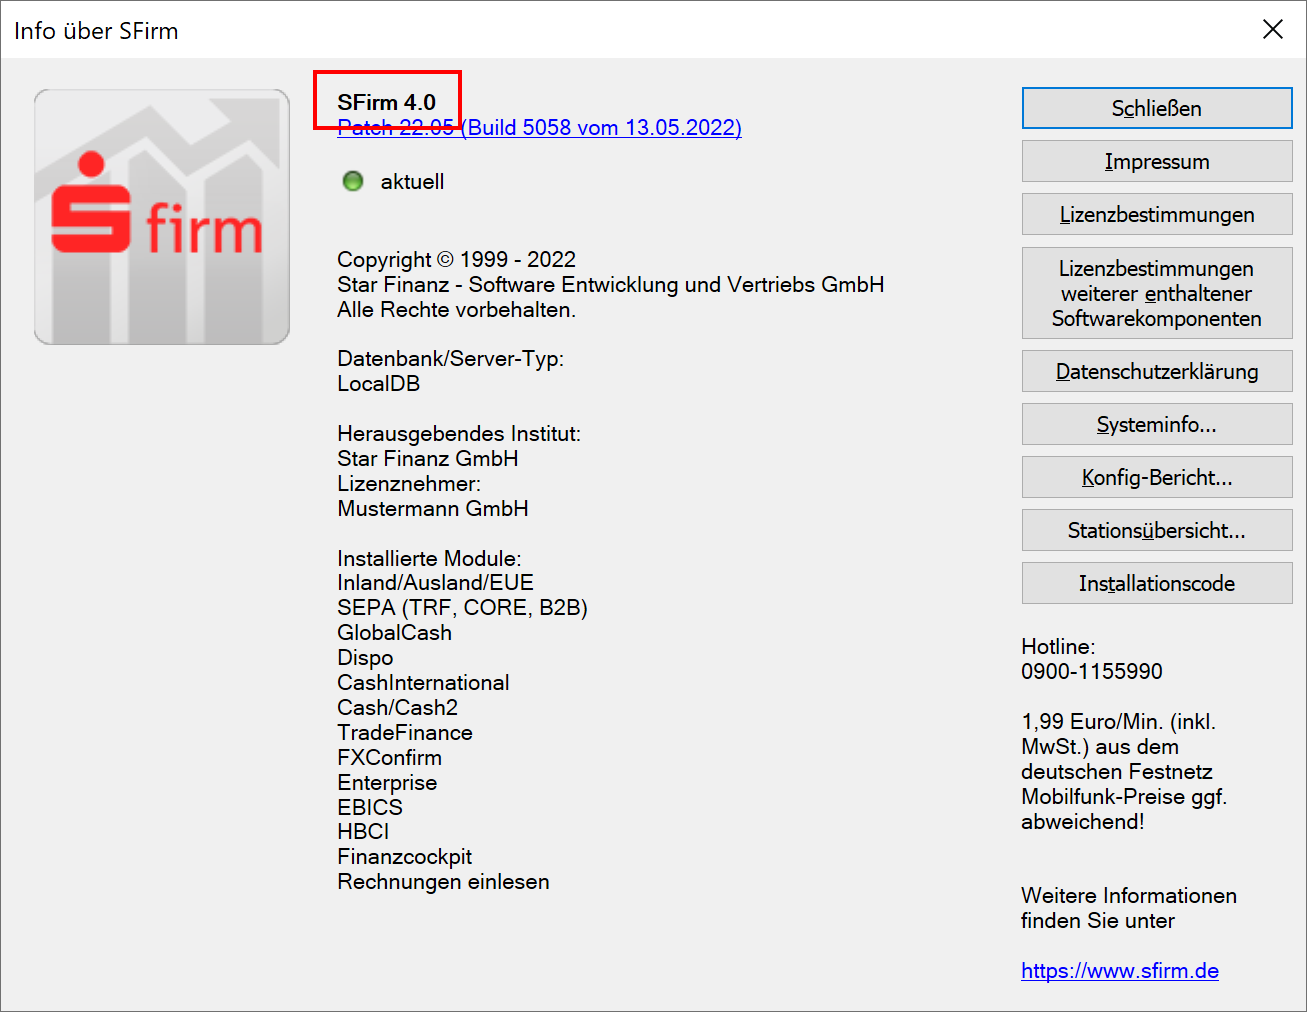 SFirm4.0_Supportende_Info_Dialog.png